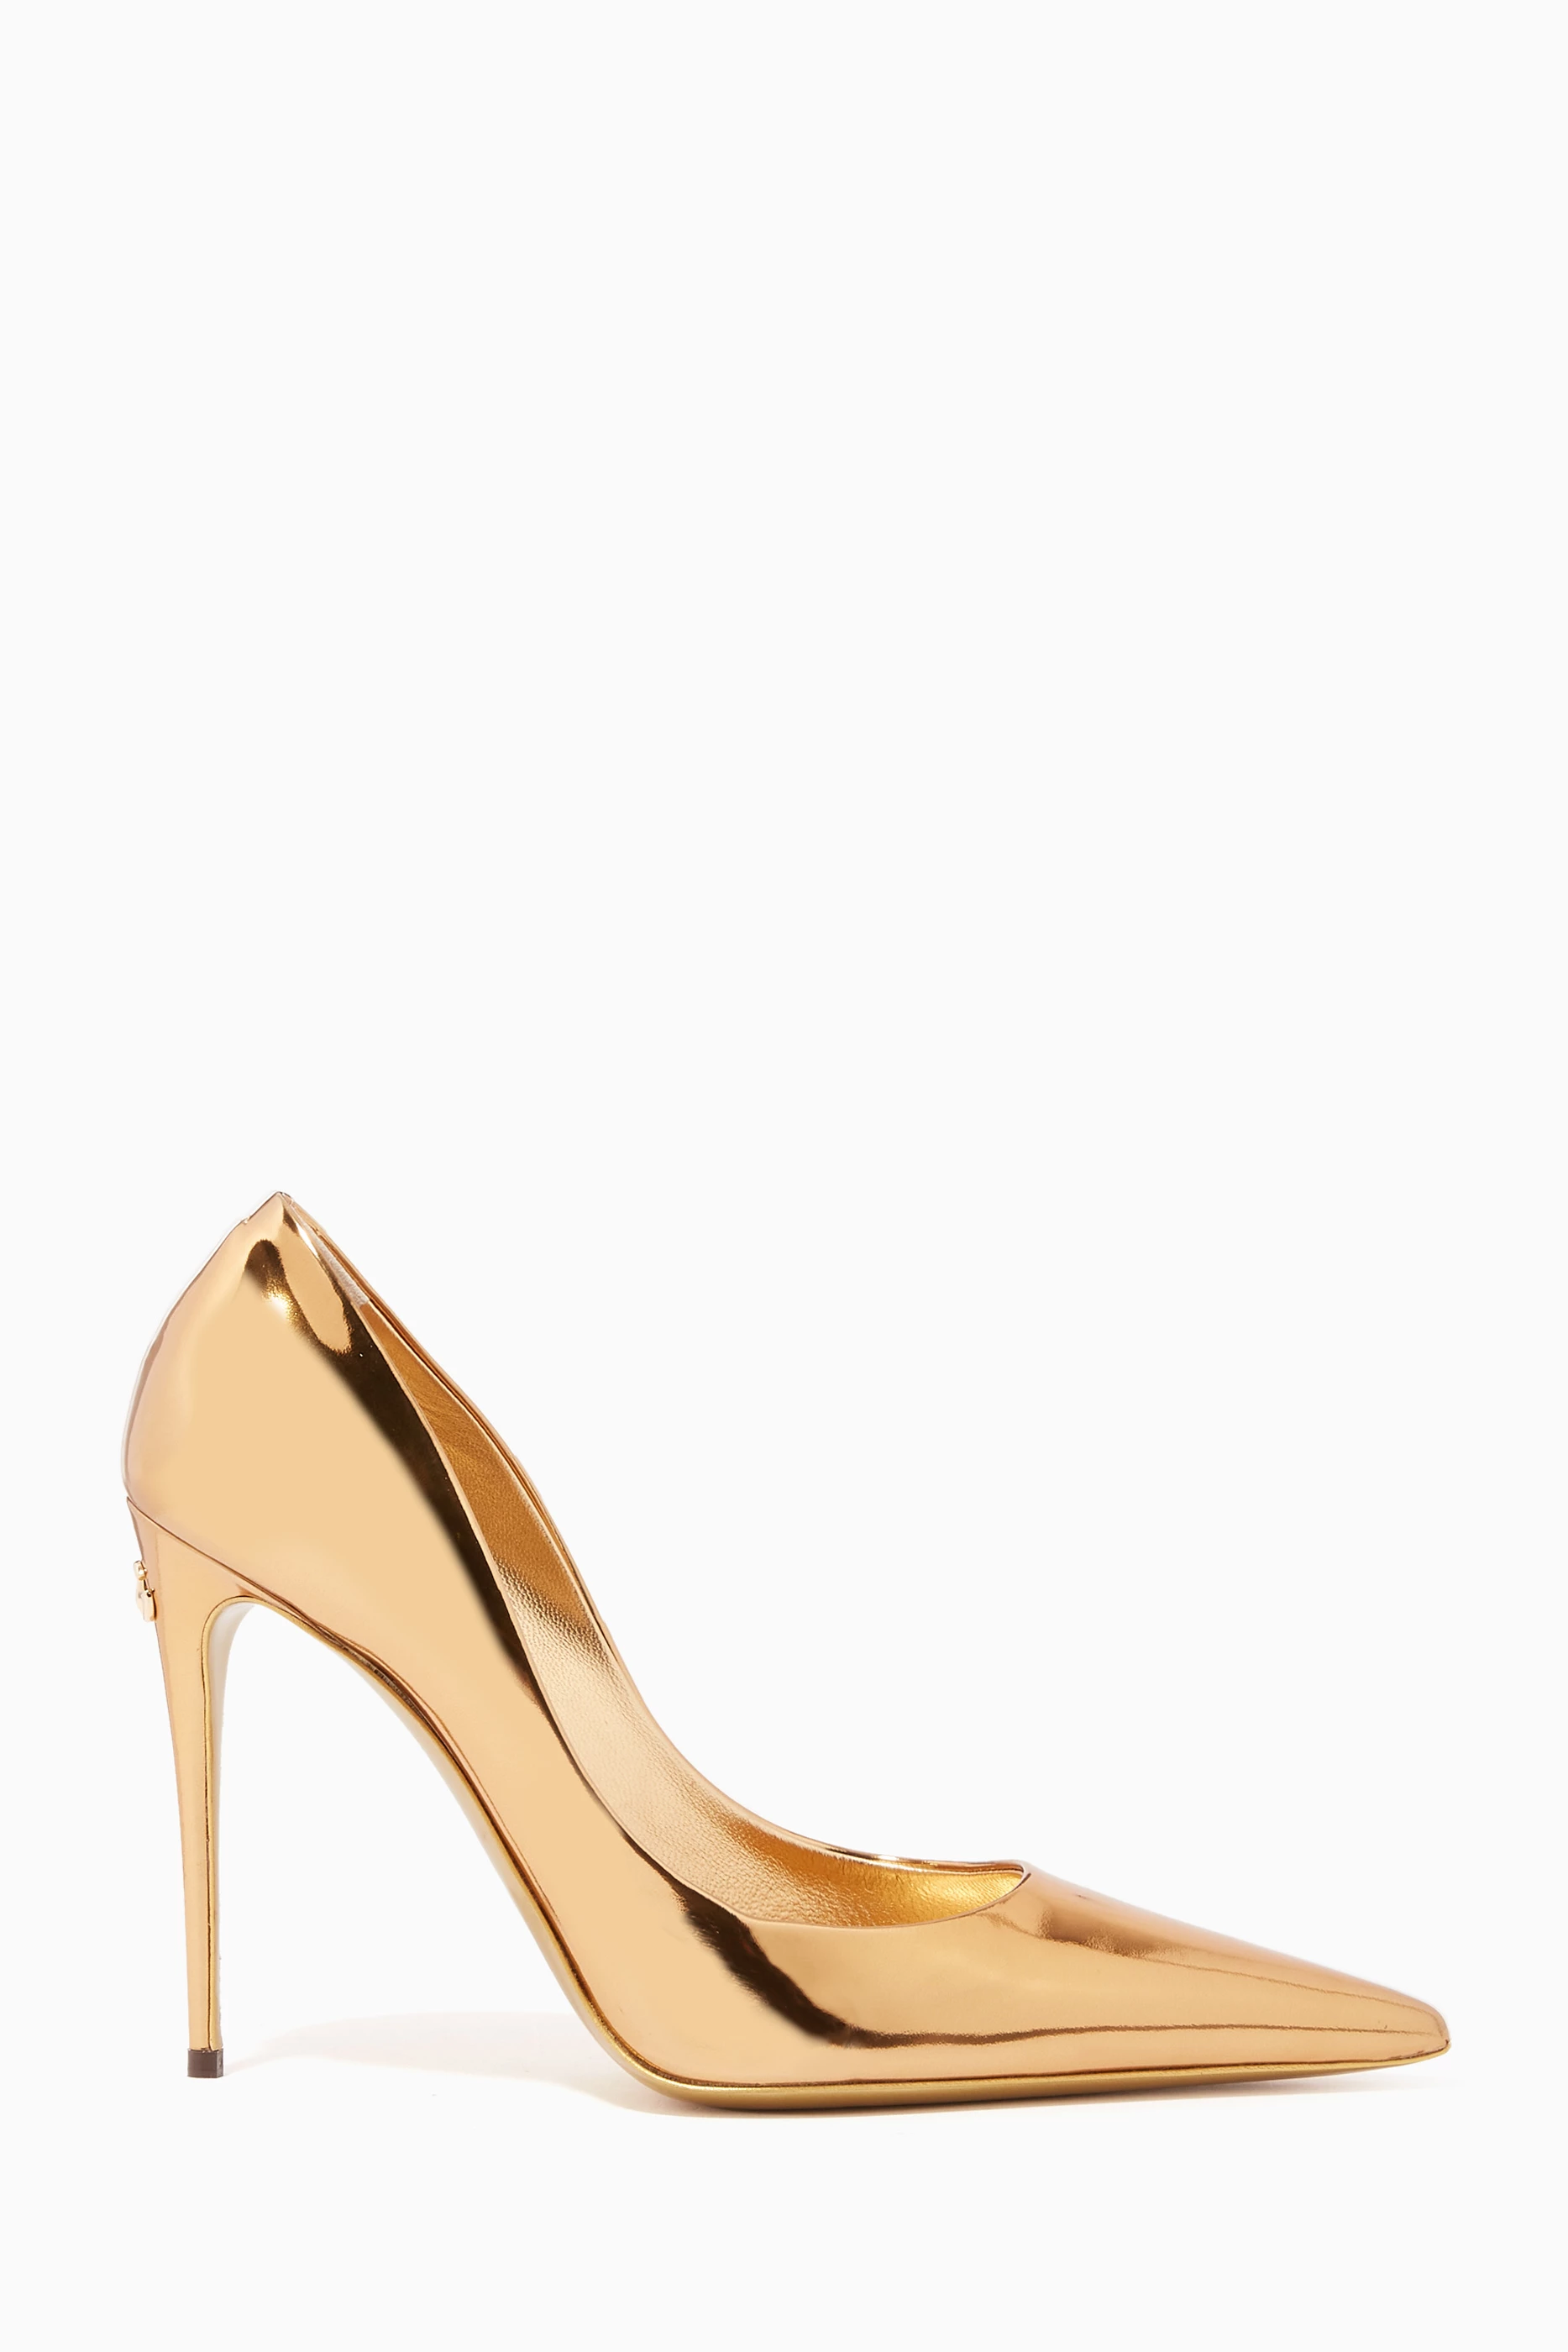 Shop Dolce & Gabbana Gold Lollo 105 Pumps in Mirror Leather for WOMEN |  Ounass Oman